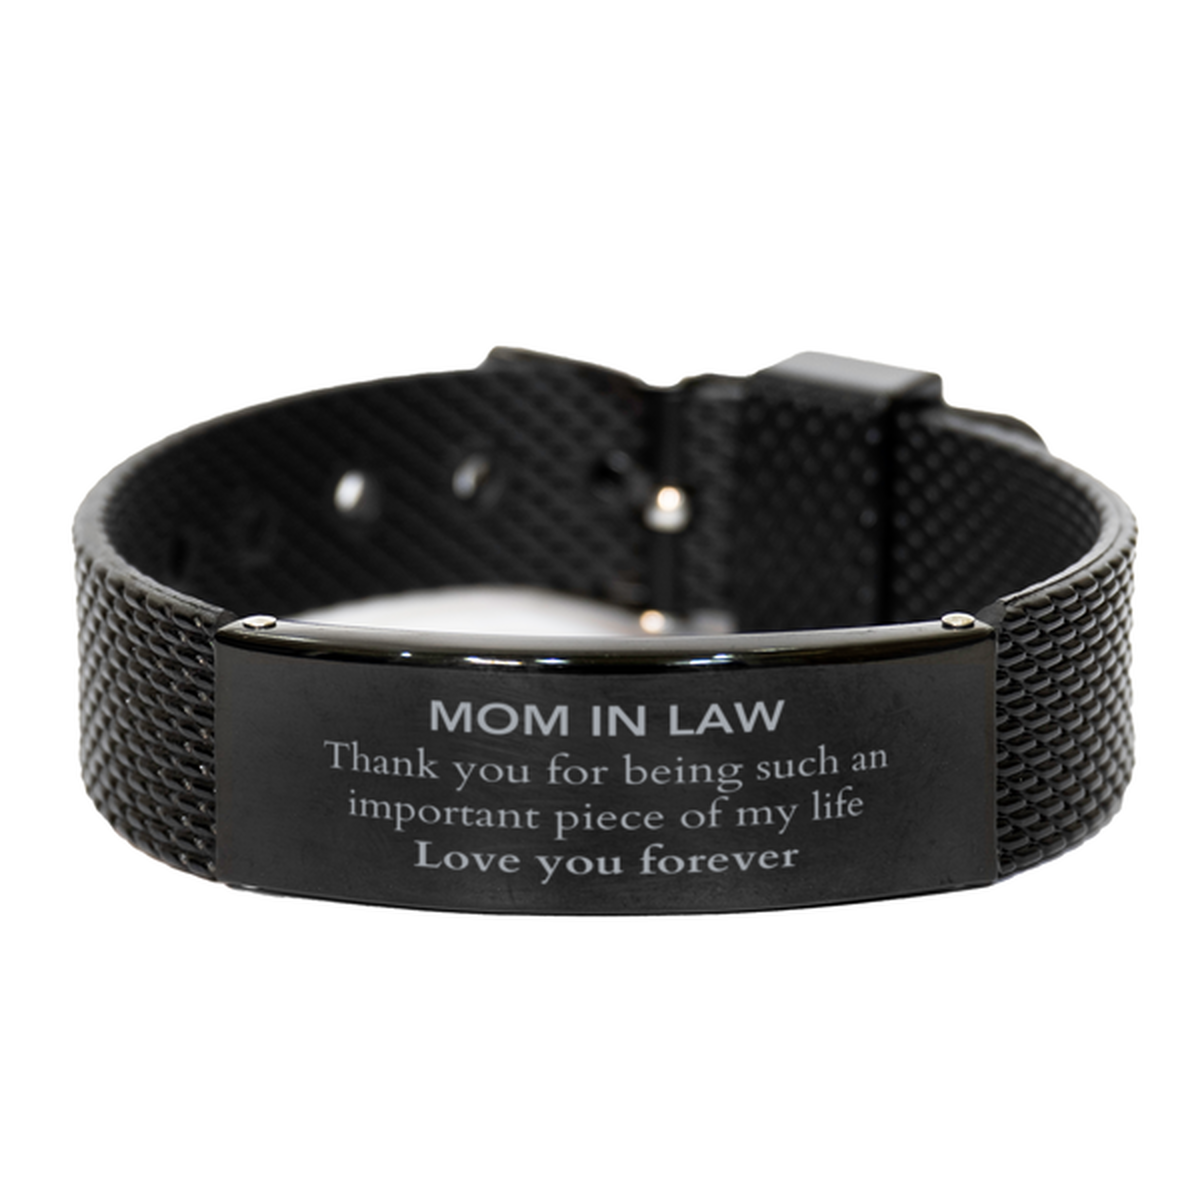 Appropriate Mom In Law Black Shark Mesh Bracelet Epic Birthday Gifts for Mom In Law Thank you for being such an important piece of my life Mom In Law Christmas Mothers Fathers Day